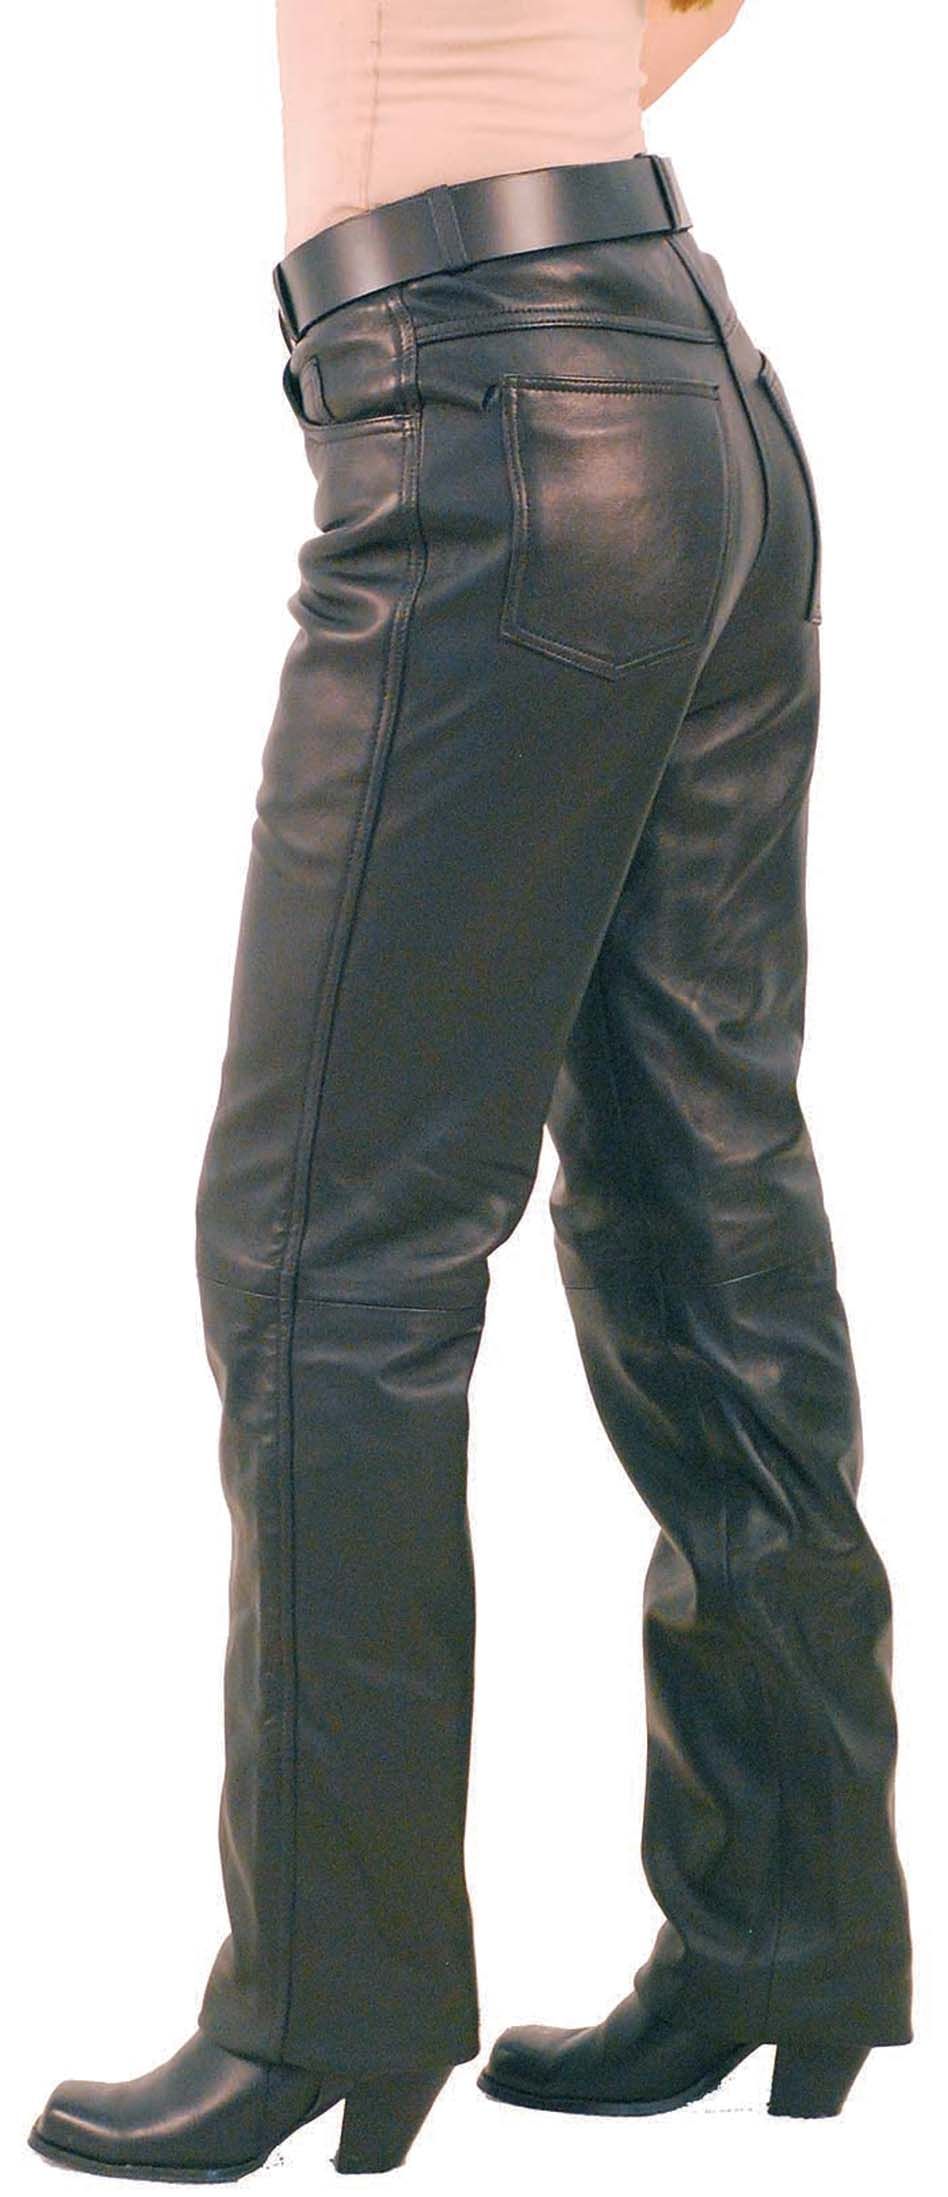 black leather trousers for bikers